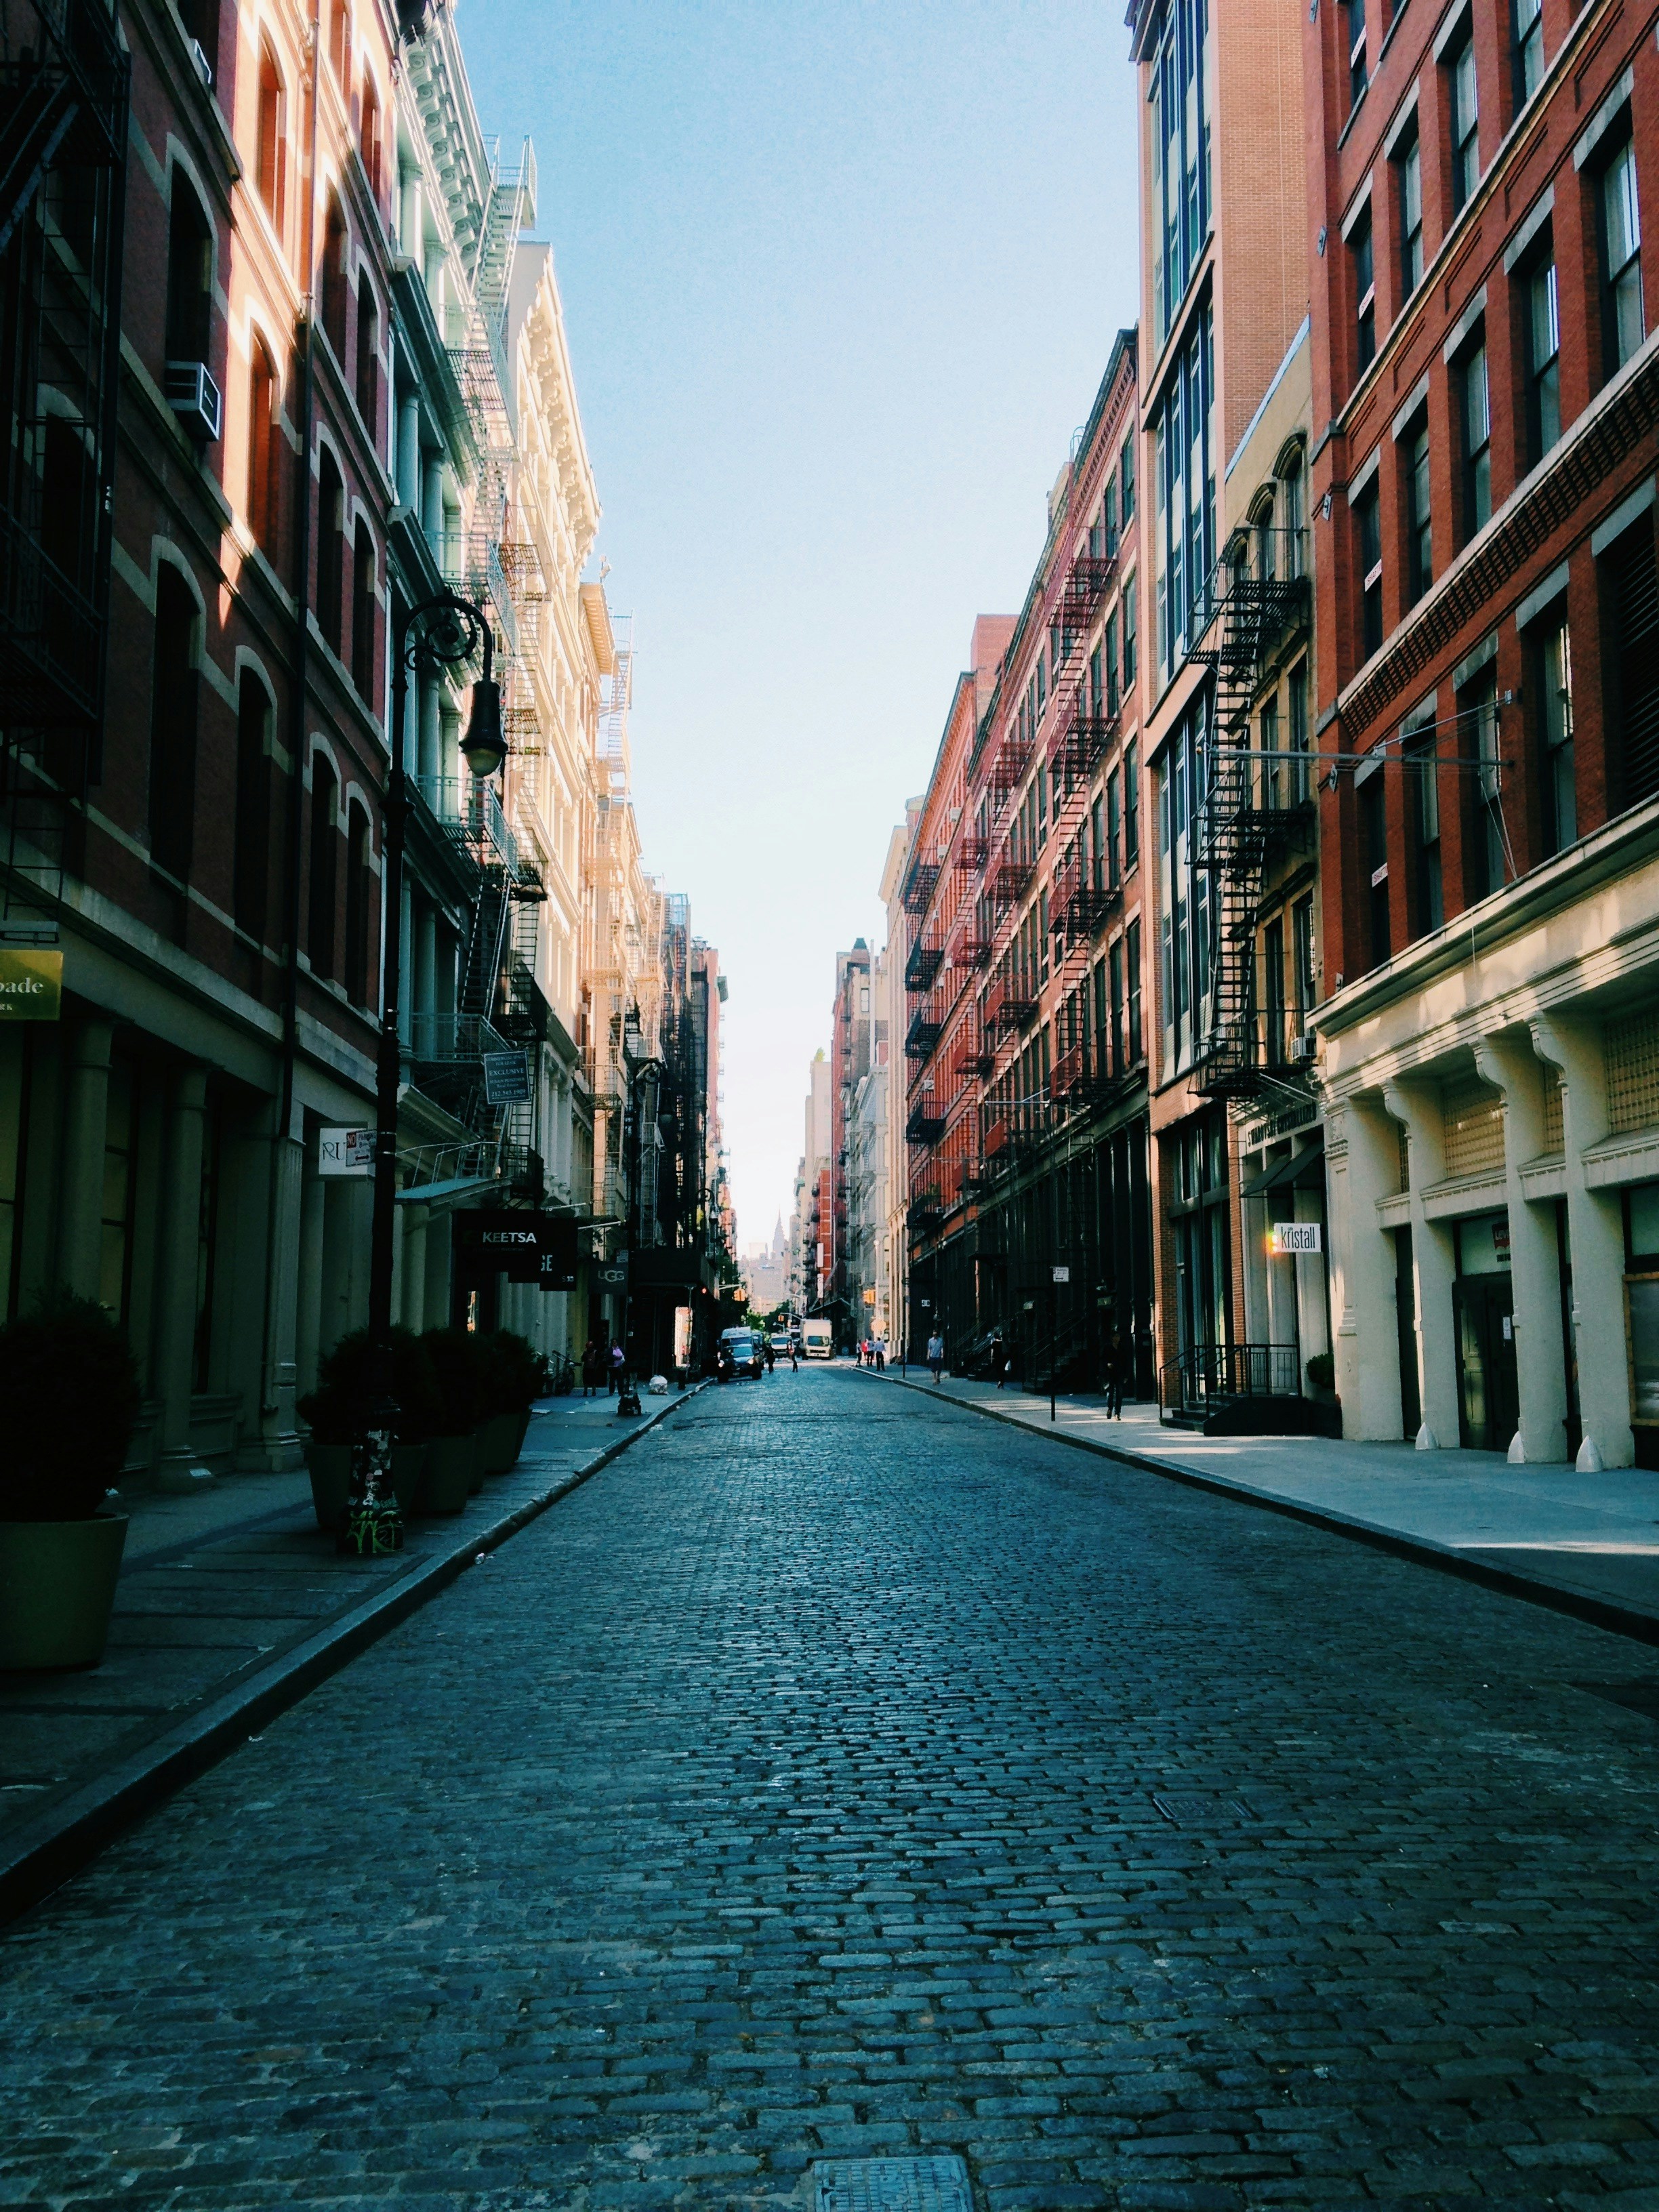 27 City Street Pictures Download Free Images On Unsplash